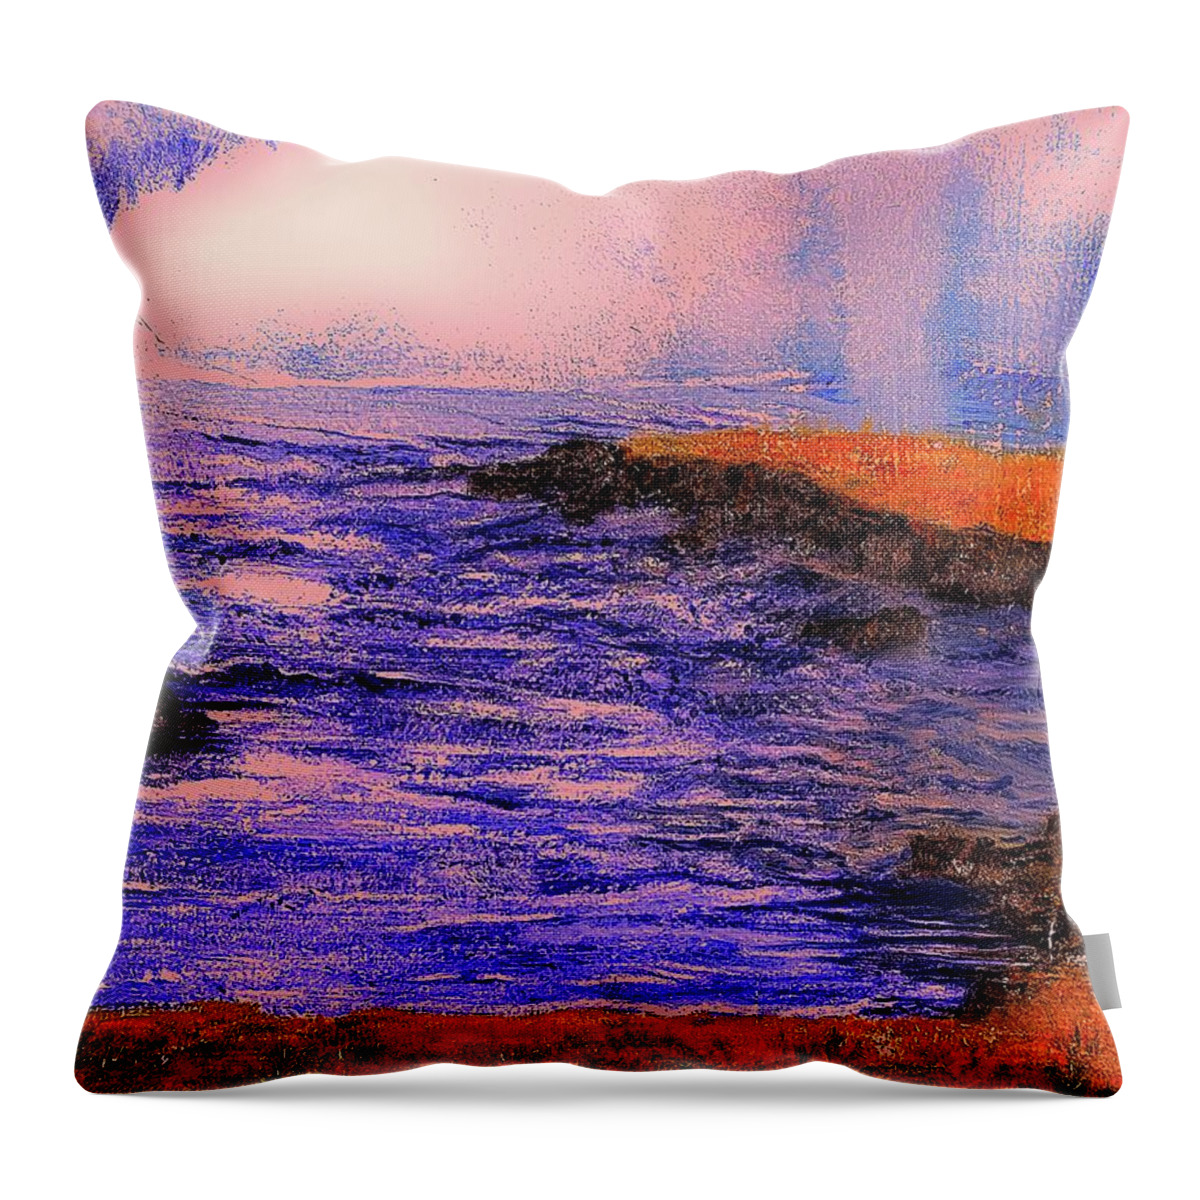 Smoggy Day Pacific Coast Throw Pillow featuring the painting Smoggy Day Pacific Coast by Michael Silbaugh